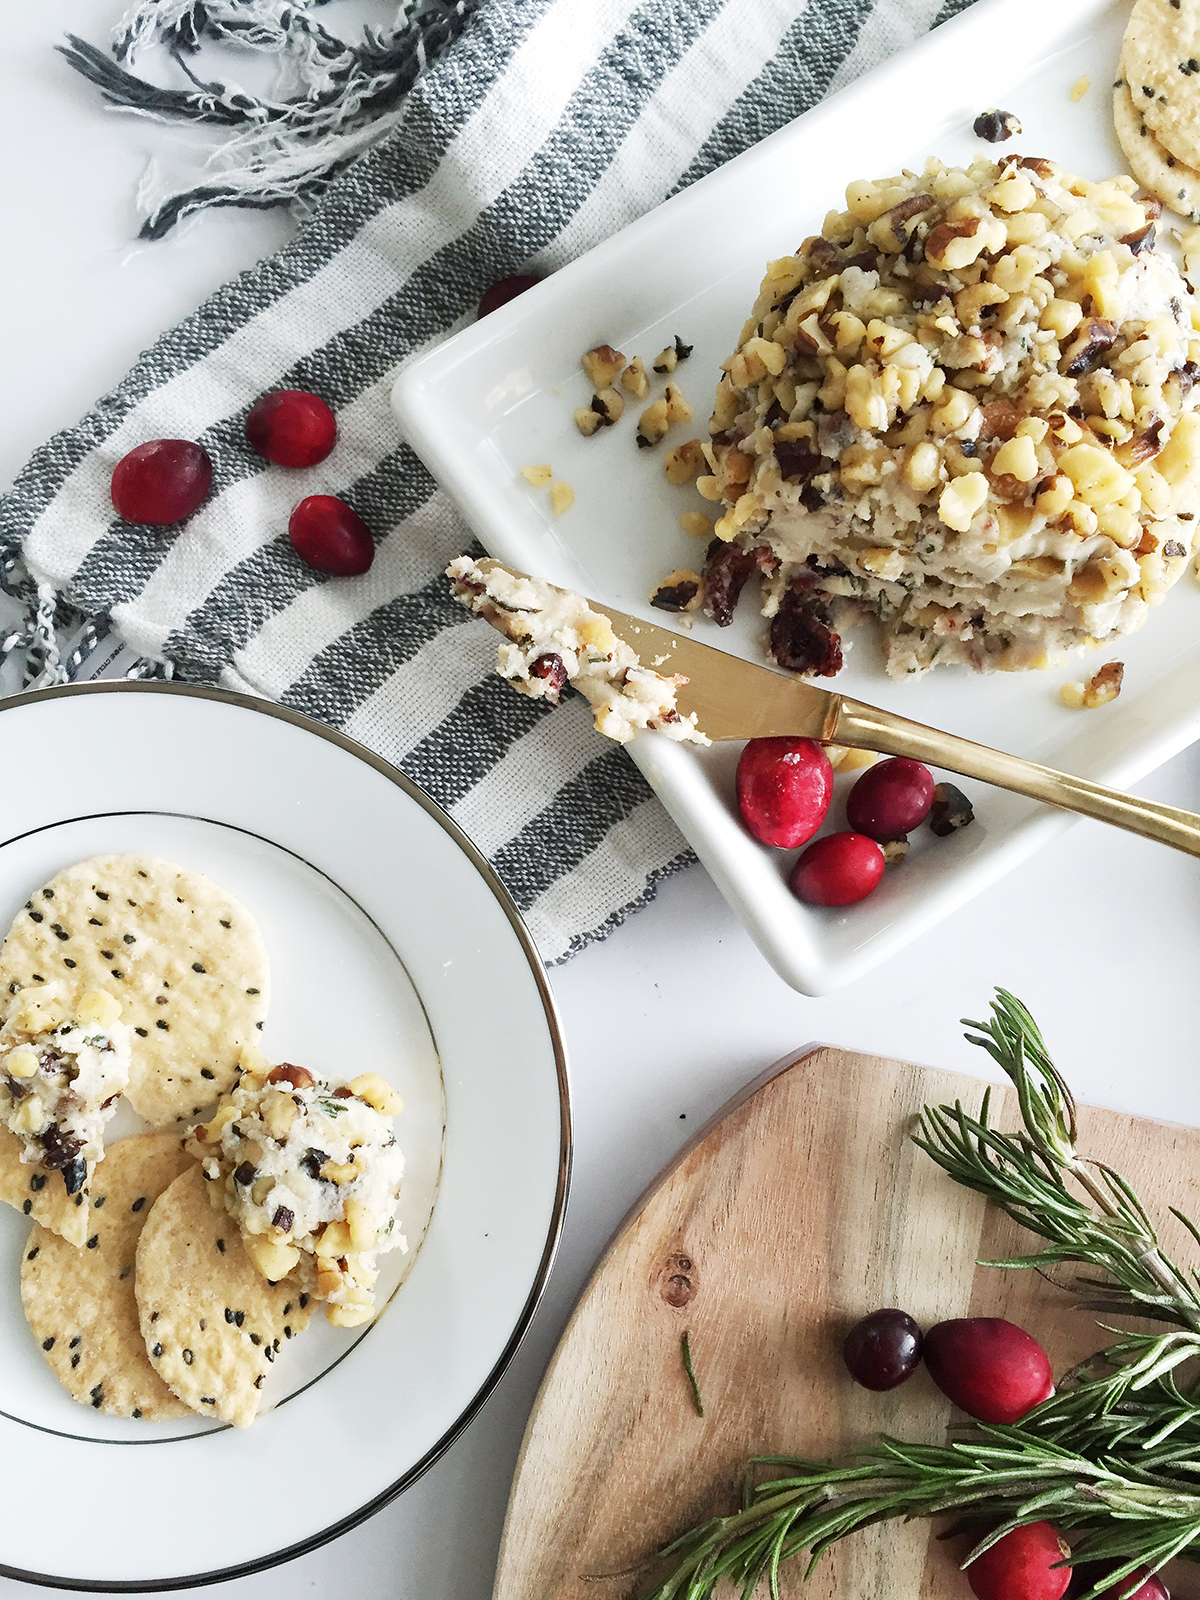 Holiday Appetizer - Vegan Cheeseball with rosemary, cranberry and walnuts | ineverything.ca